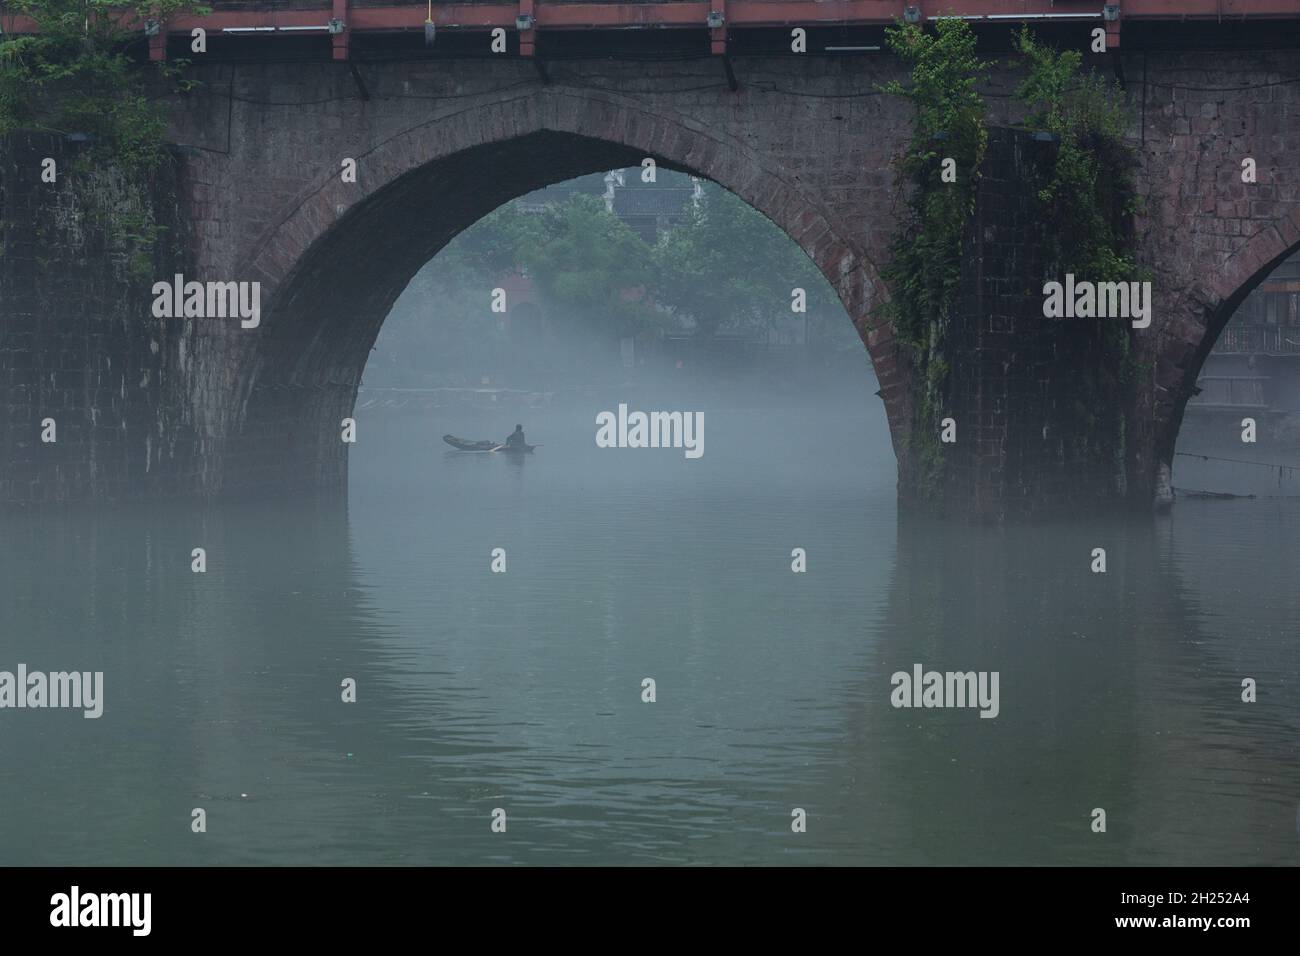 A bridge arch frames a man in a sampan in early-morning fog on the Tuojiang River in Fenghuang, China. Stock Photo